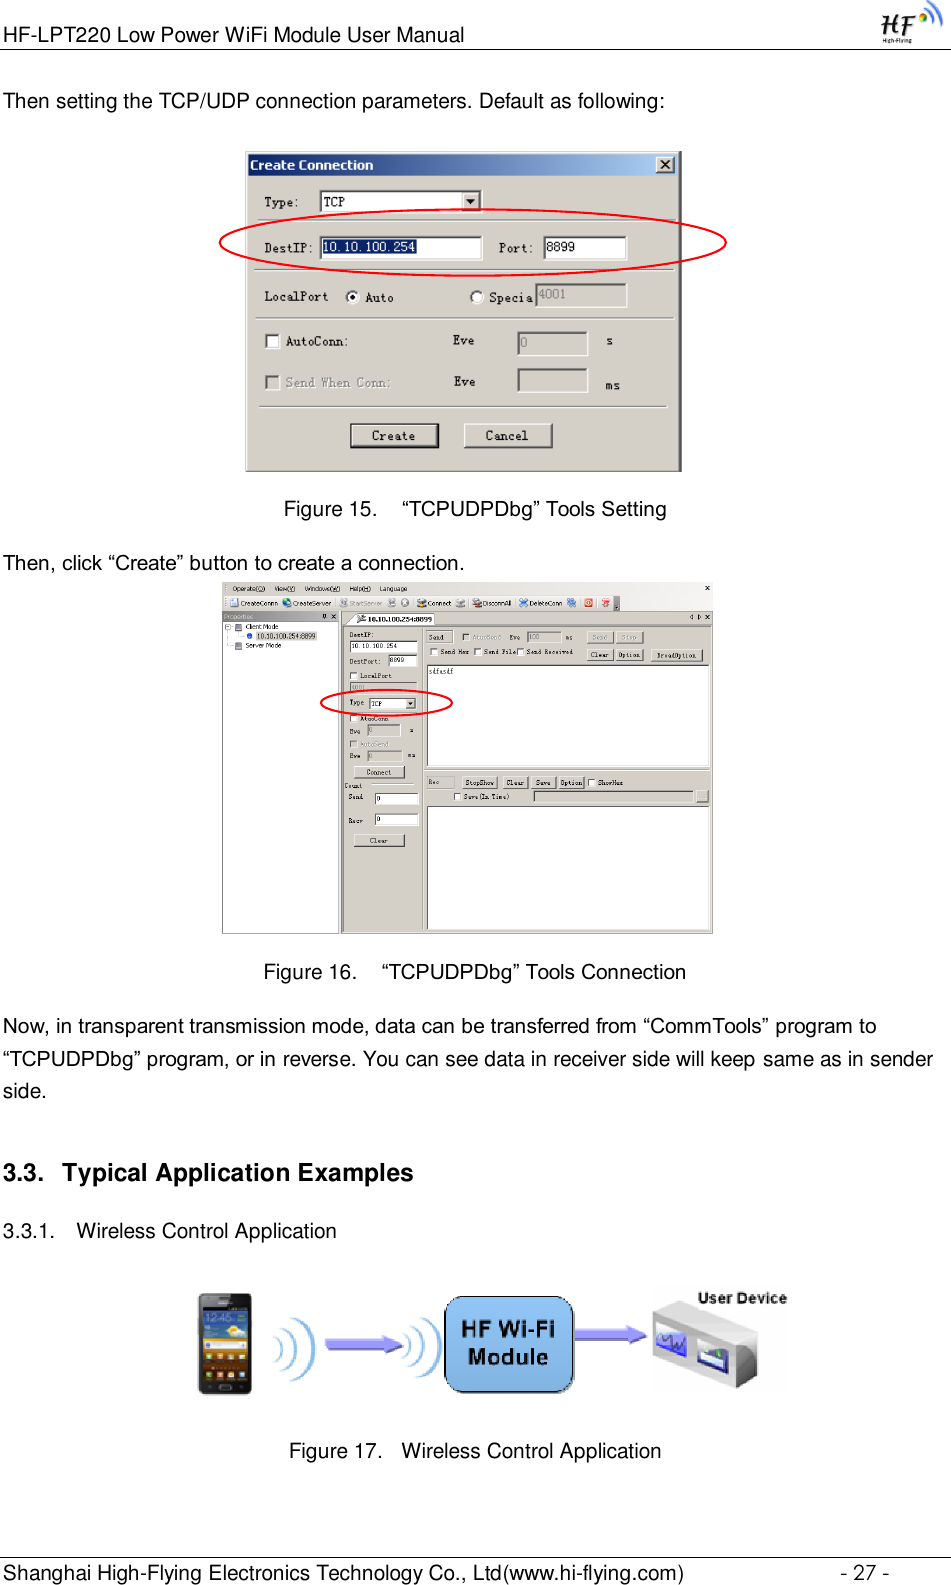 HF-LPT220 Low Power WiFi Module User Manual Shanghai High-Flying Electronics Technology Co., Ltd(www.hi-flying.com)  - 27 - Then setting the TCP/UDP connection parameters. Default as following:   Figure 15.  “TCPUDPDbg” Tools Setting Then, click “Create” button to create a connection.                              Figure 16.  “TCPUDPDbg” Tools Connection Now, in transparent transmission mode, data can be transferred from “CommTools” program to “TCPUDPDbg” program, or in reverse. You can see data in receiver side will keep same as in sender side. 3.3. Typical Application Examples 3.3.1. Wireless Control Application     Figure 17. Wireless Control Application 